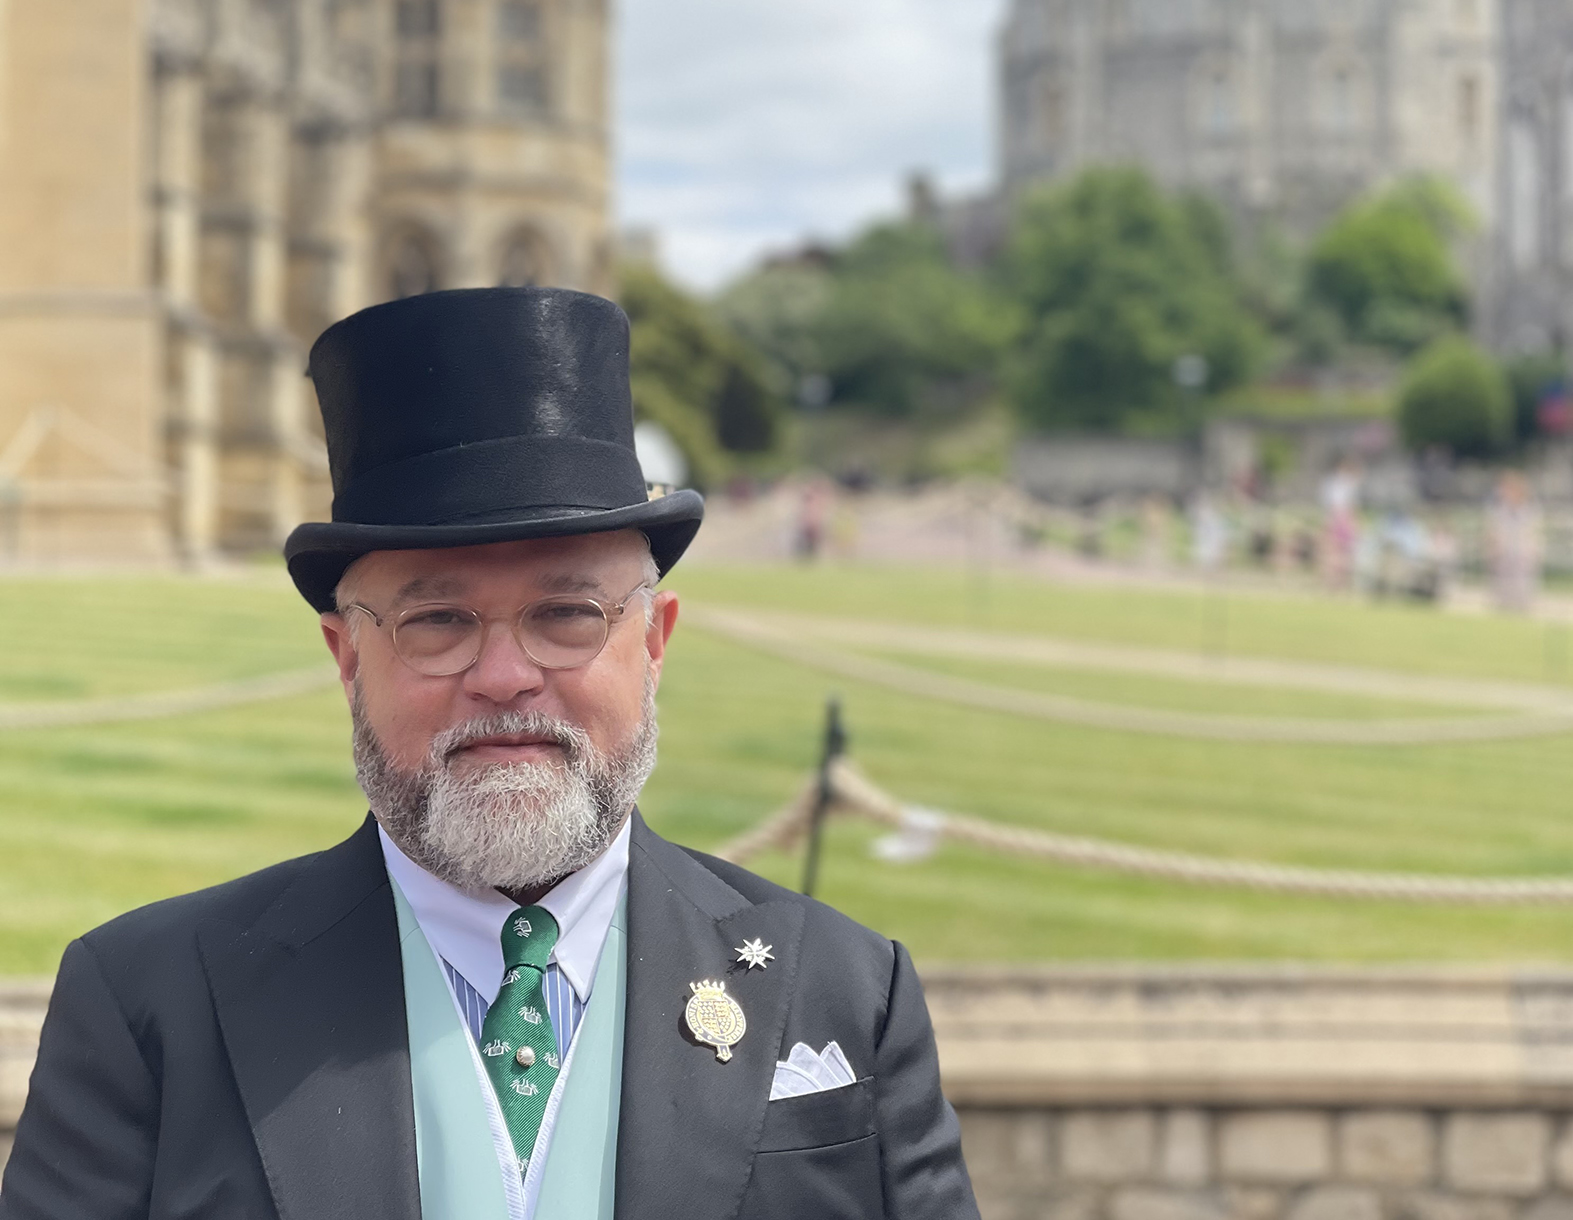 Simons, President of the American Friends of St George’s Chapel, attends Garter Day 2022, at Windsor Castle, for a service with new Garter Knights, including HRH The Duchess of Cornwall, now The Queen Consort, and former UK Prime Minister, Sir Tony Blair.